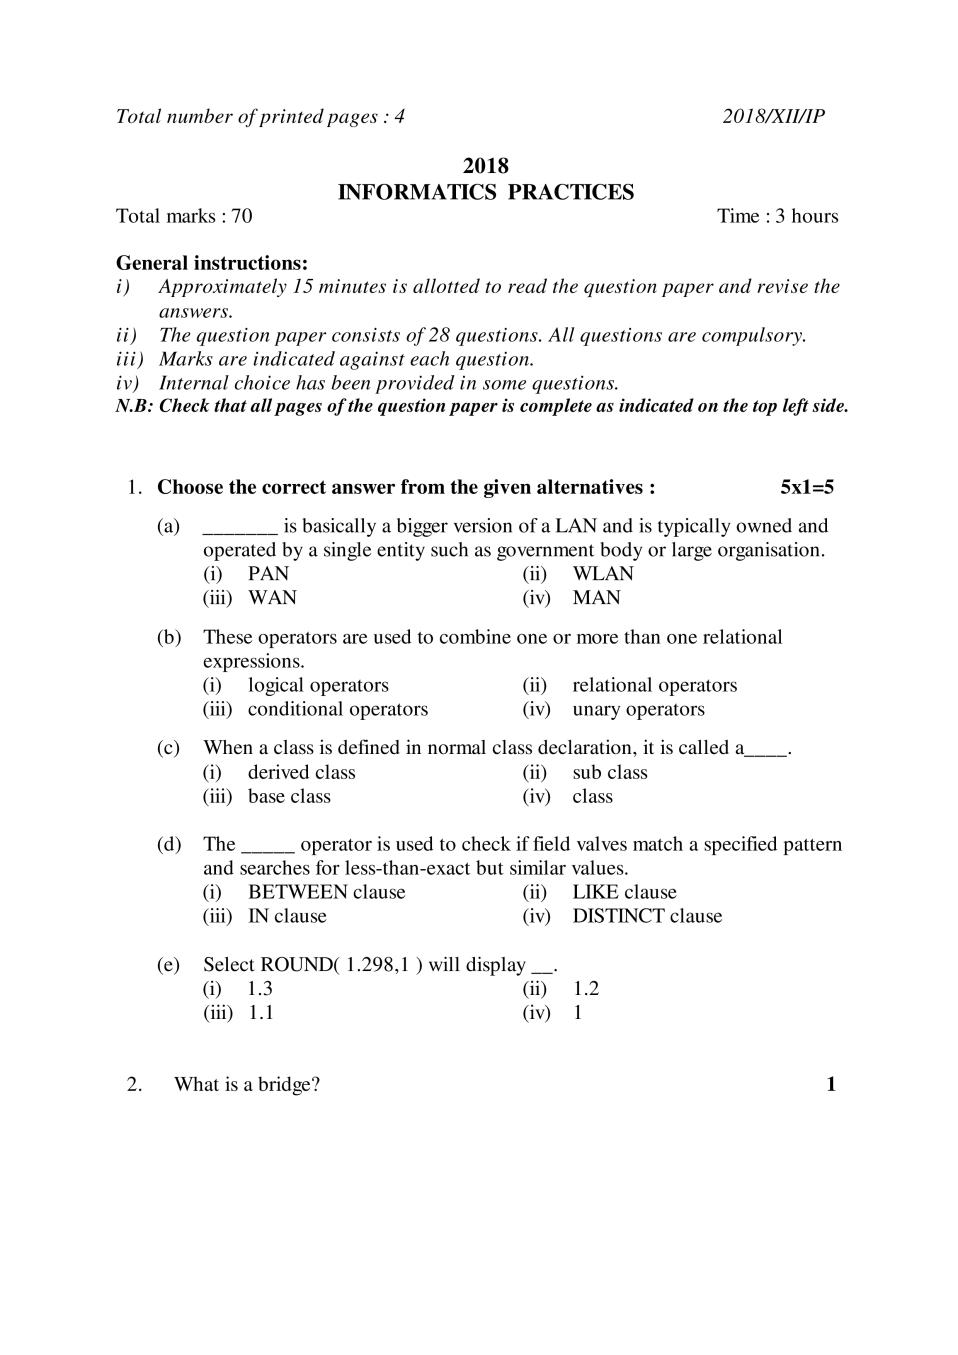 NBSE Class 12 Question Paper 2018 for Informatic Pratices - Page 1